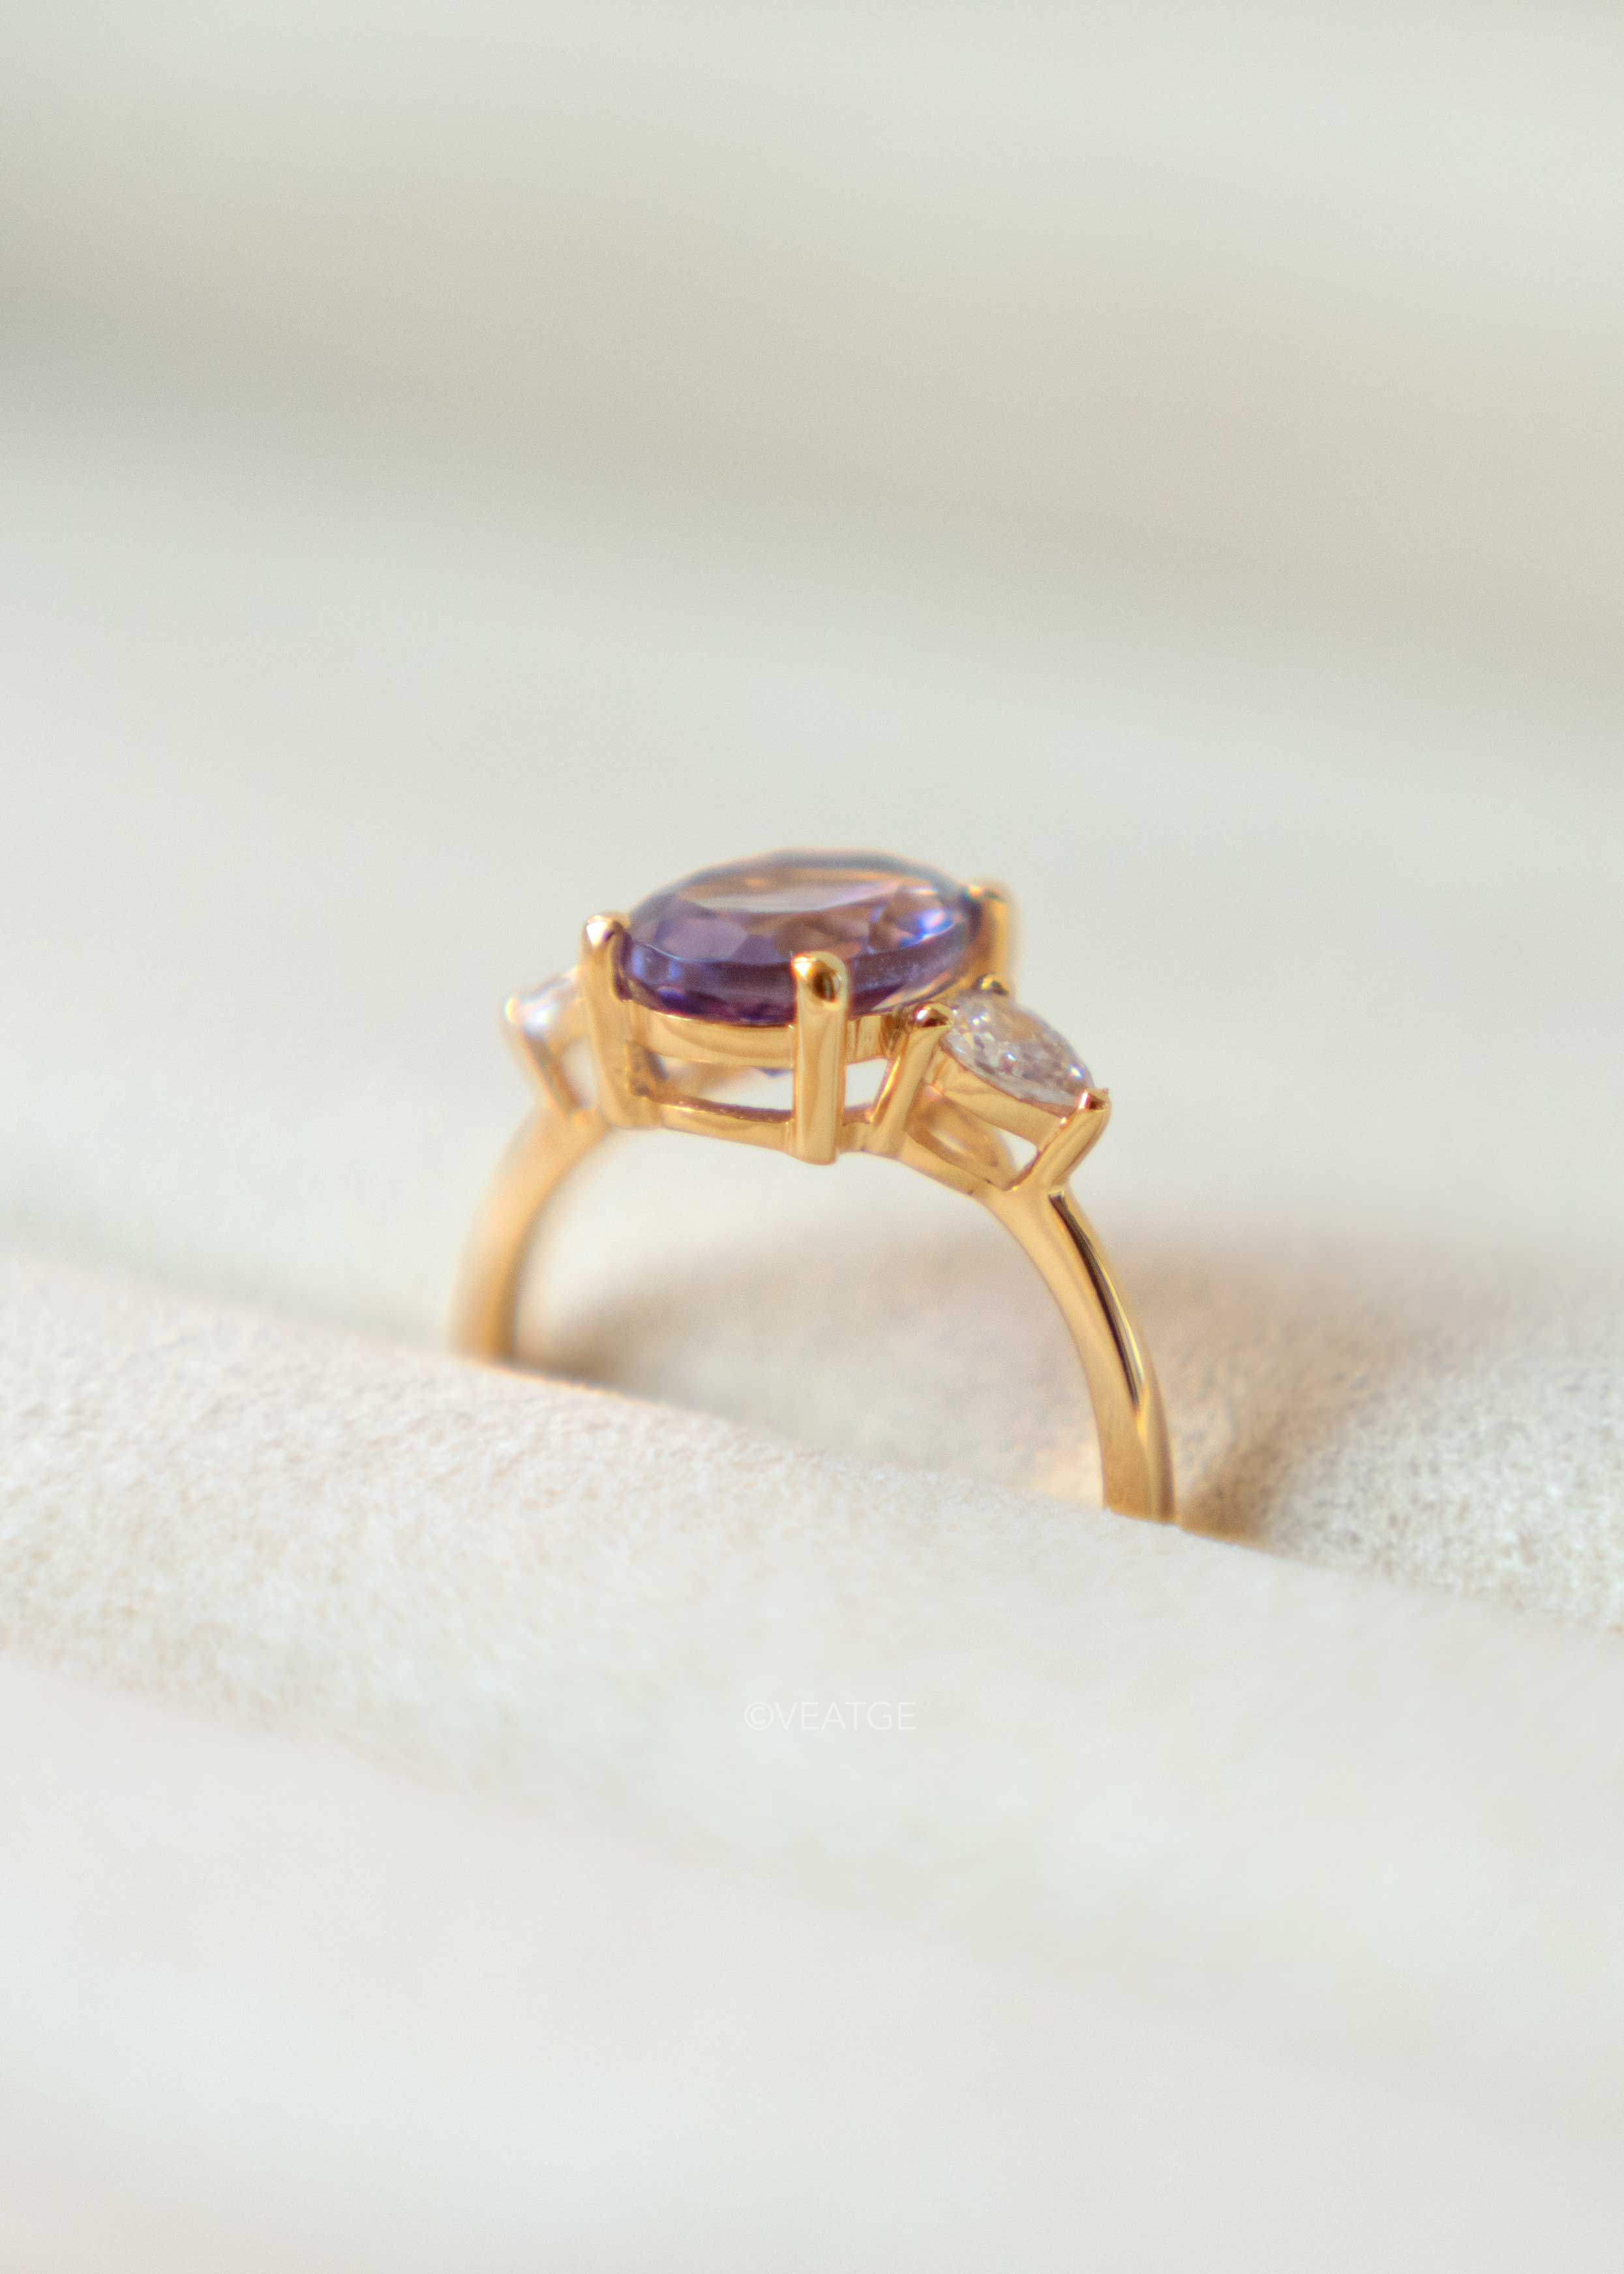 Amethyst Ring 925 Sterling Silver Gold Engagement Proposal Anniversary Birthday February Birthstone Ring Rings Gifts for Women Girlfriend Promise Rings